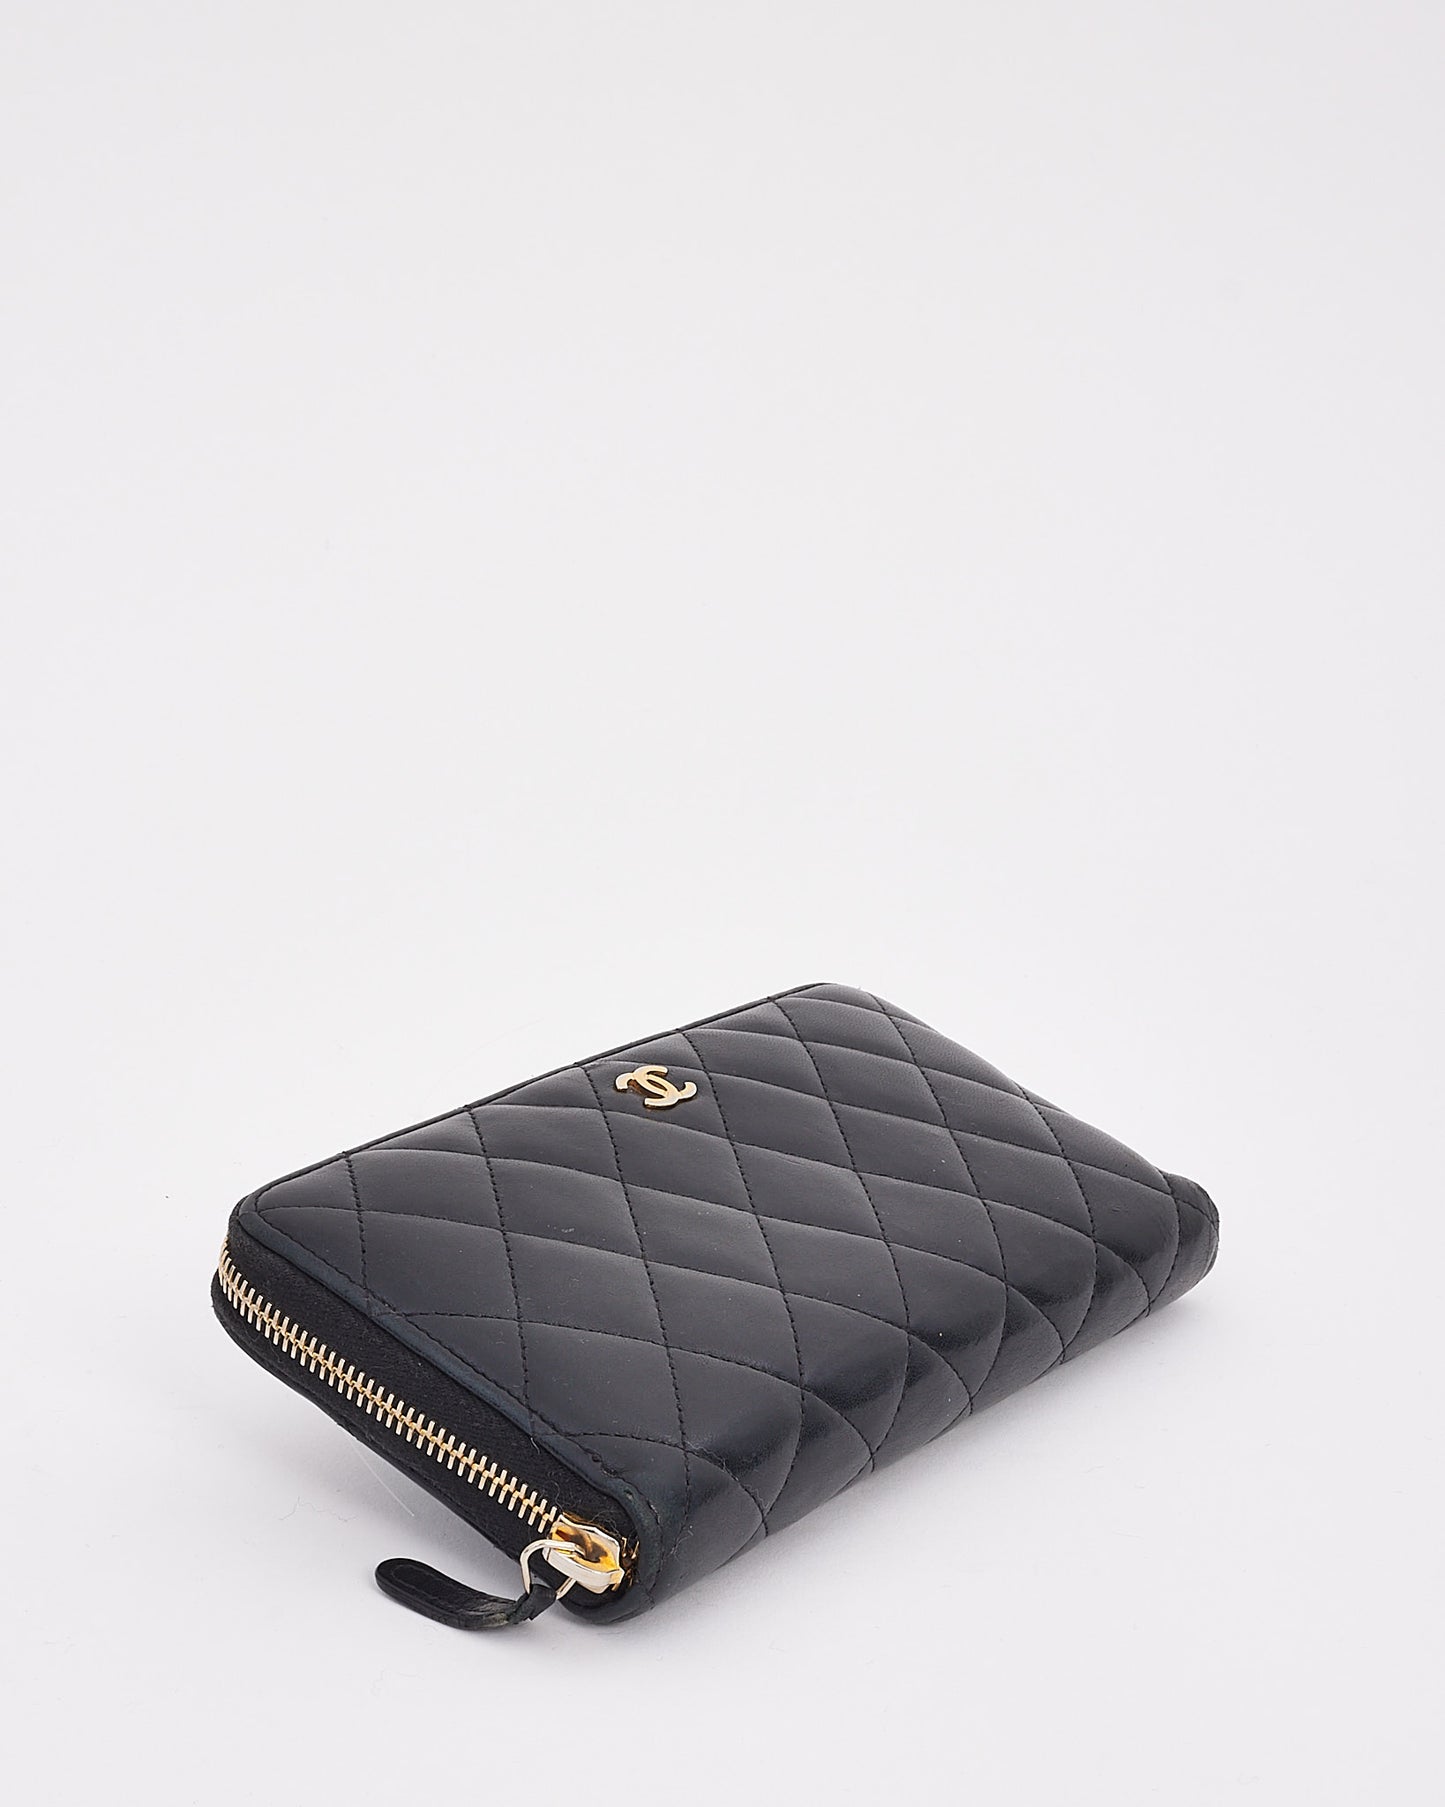 Chanel Black Quilted Leather Long Classic Wallet